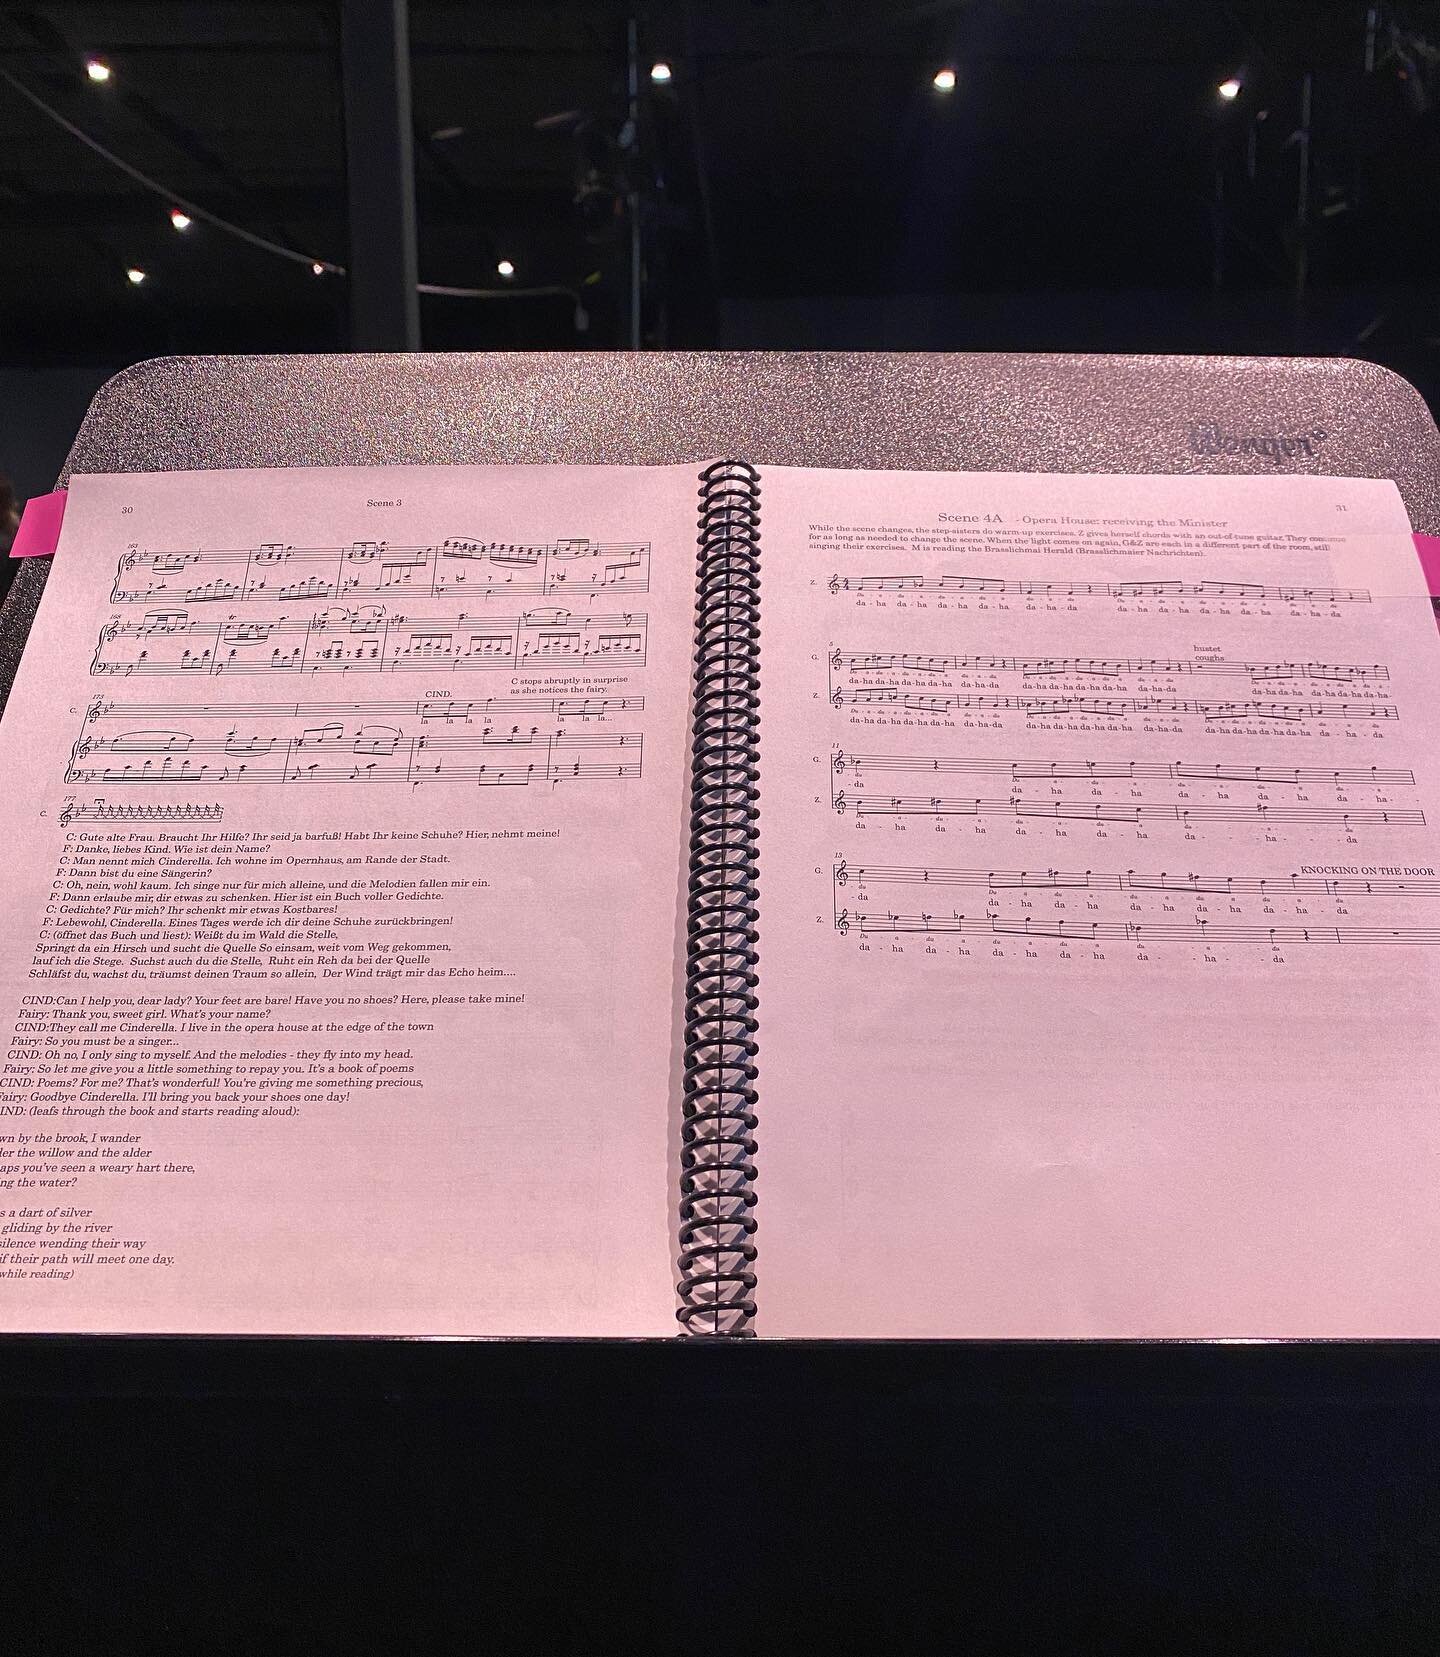 It&rsquo;s been a while! #musicrehearsals have begun @operasanjose for @alma_deutscher&rsquo;s #cinderella! Can&rsquo;t wait for all the evil stepmother-ing to come! 😈